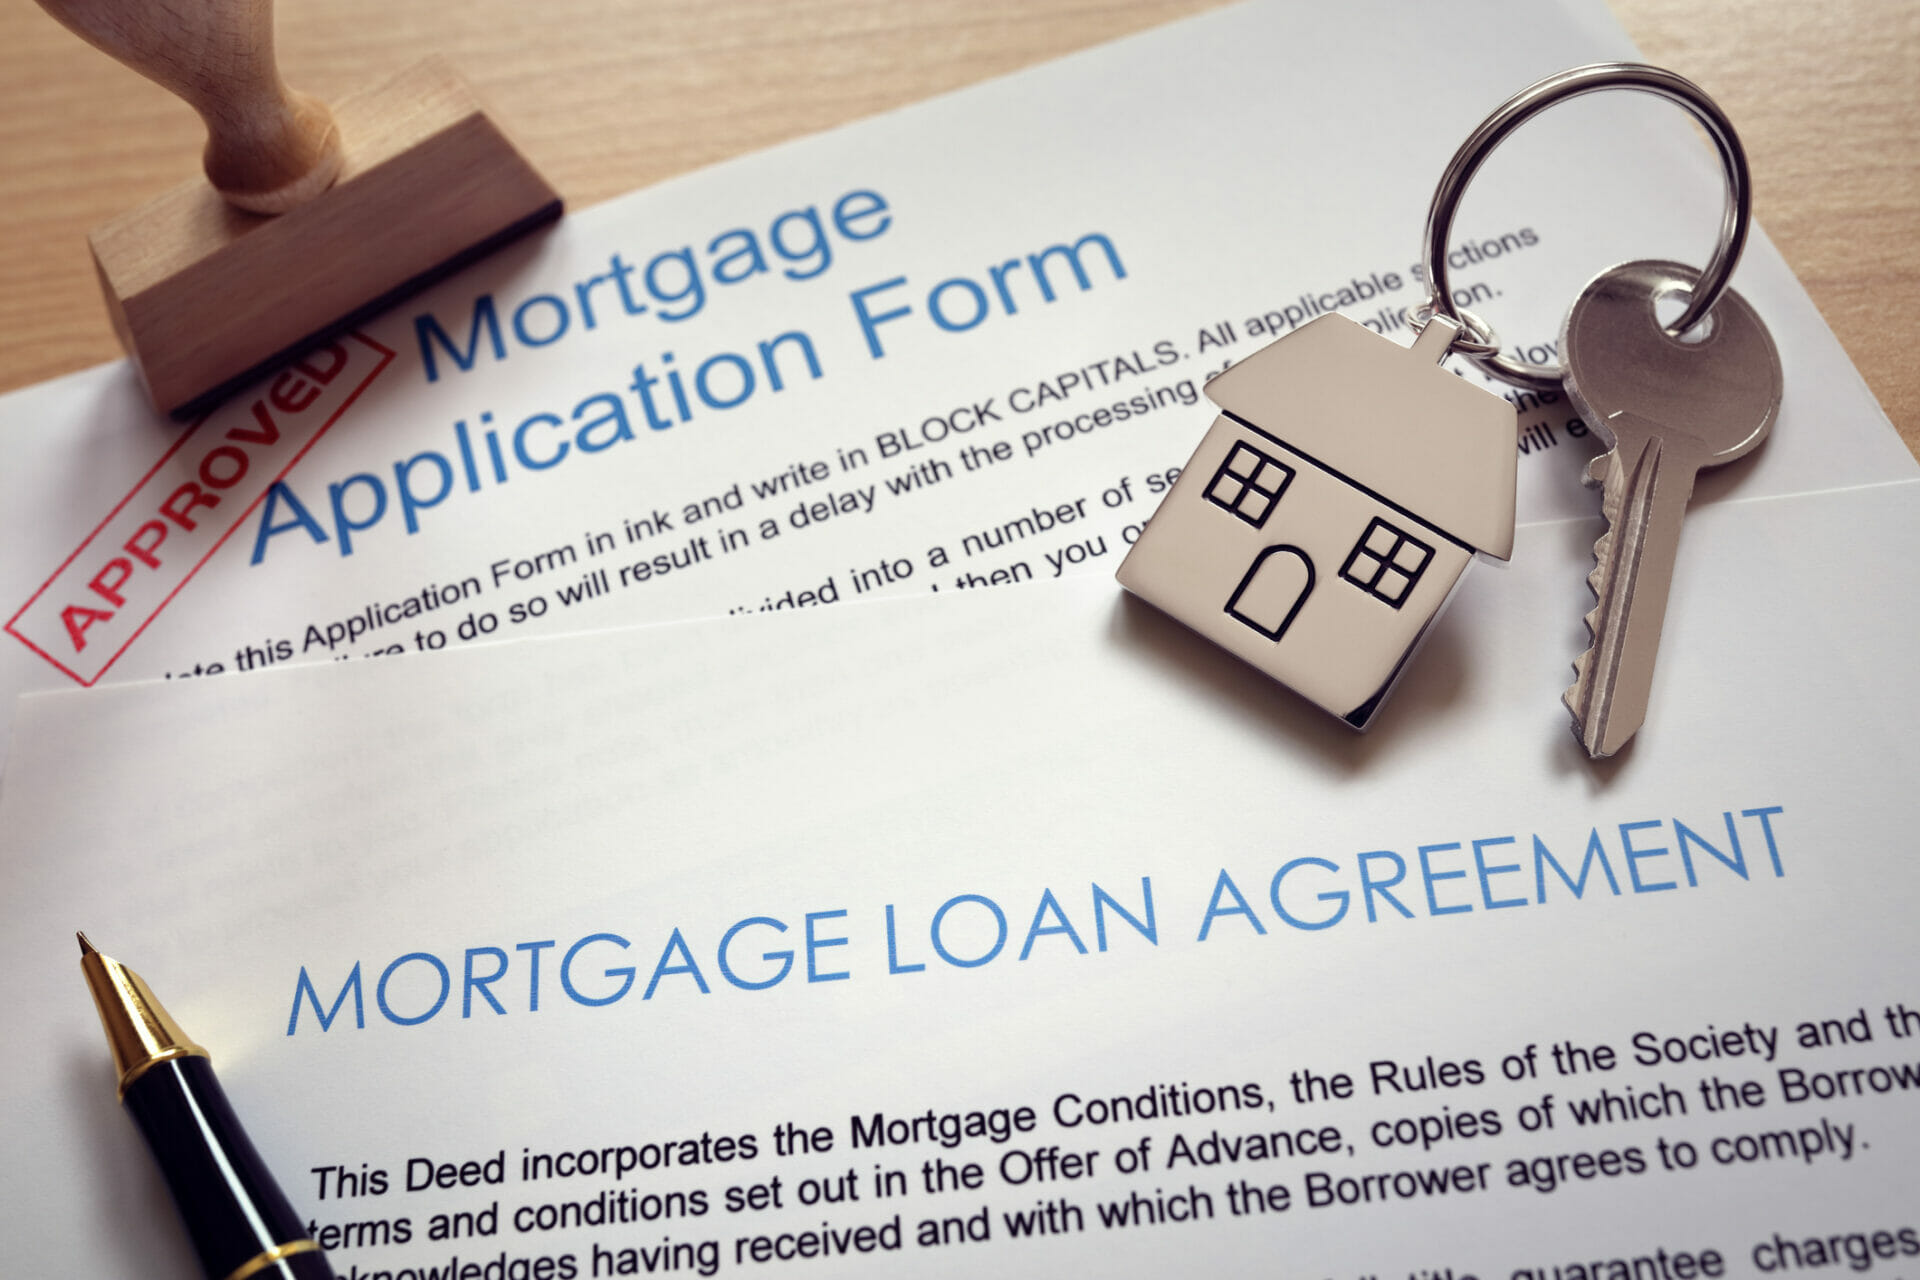 MOrtgage loan agreement document with a keychain